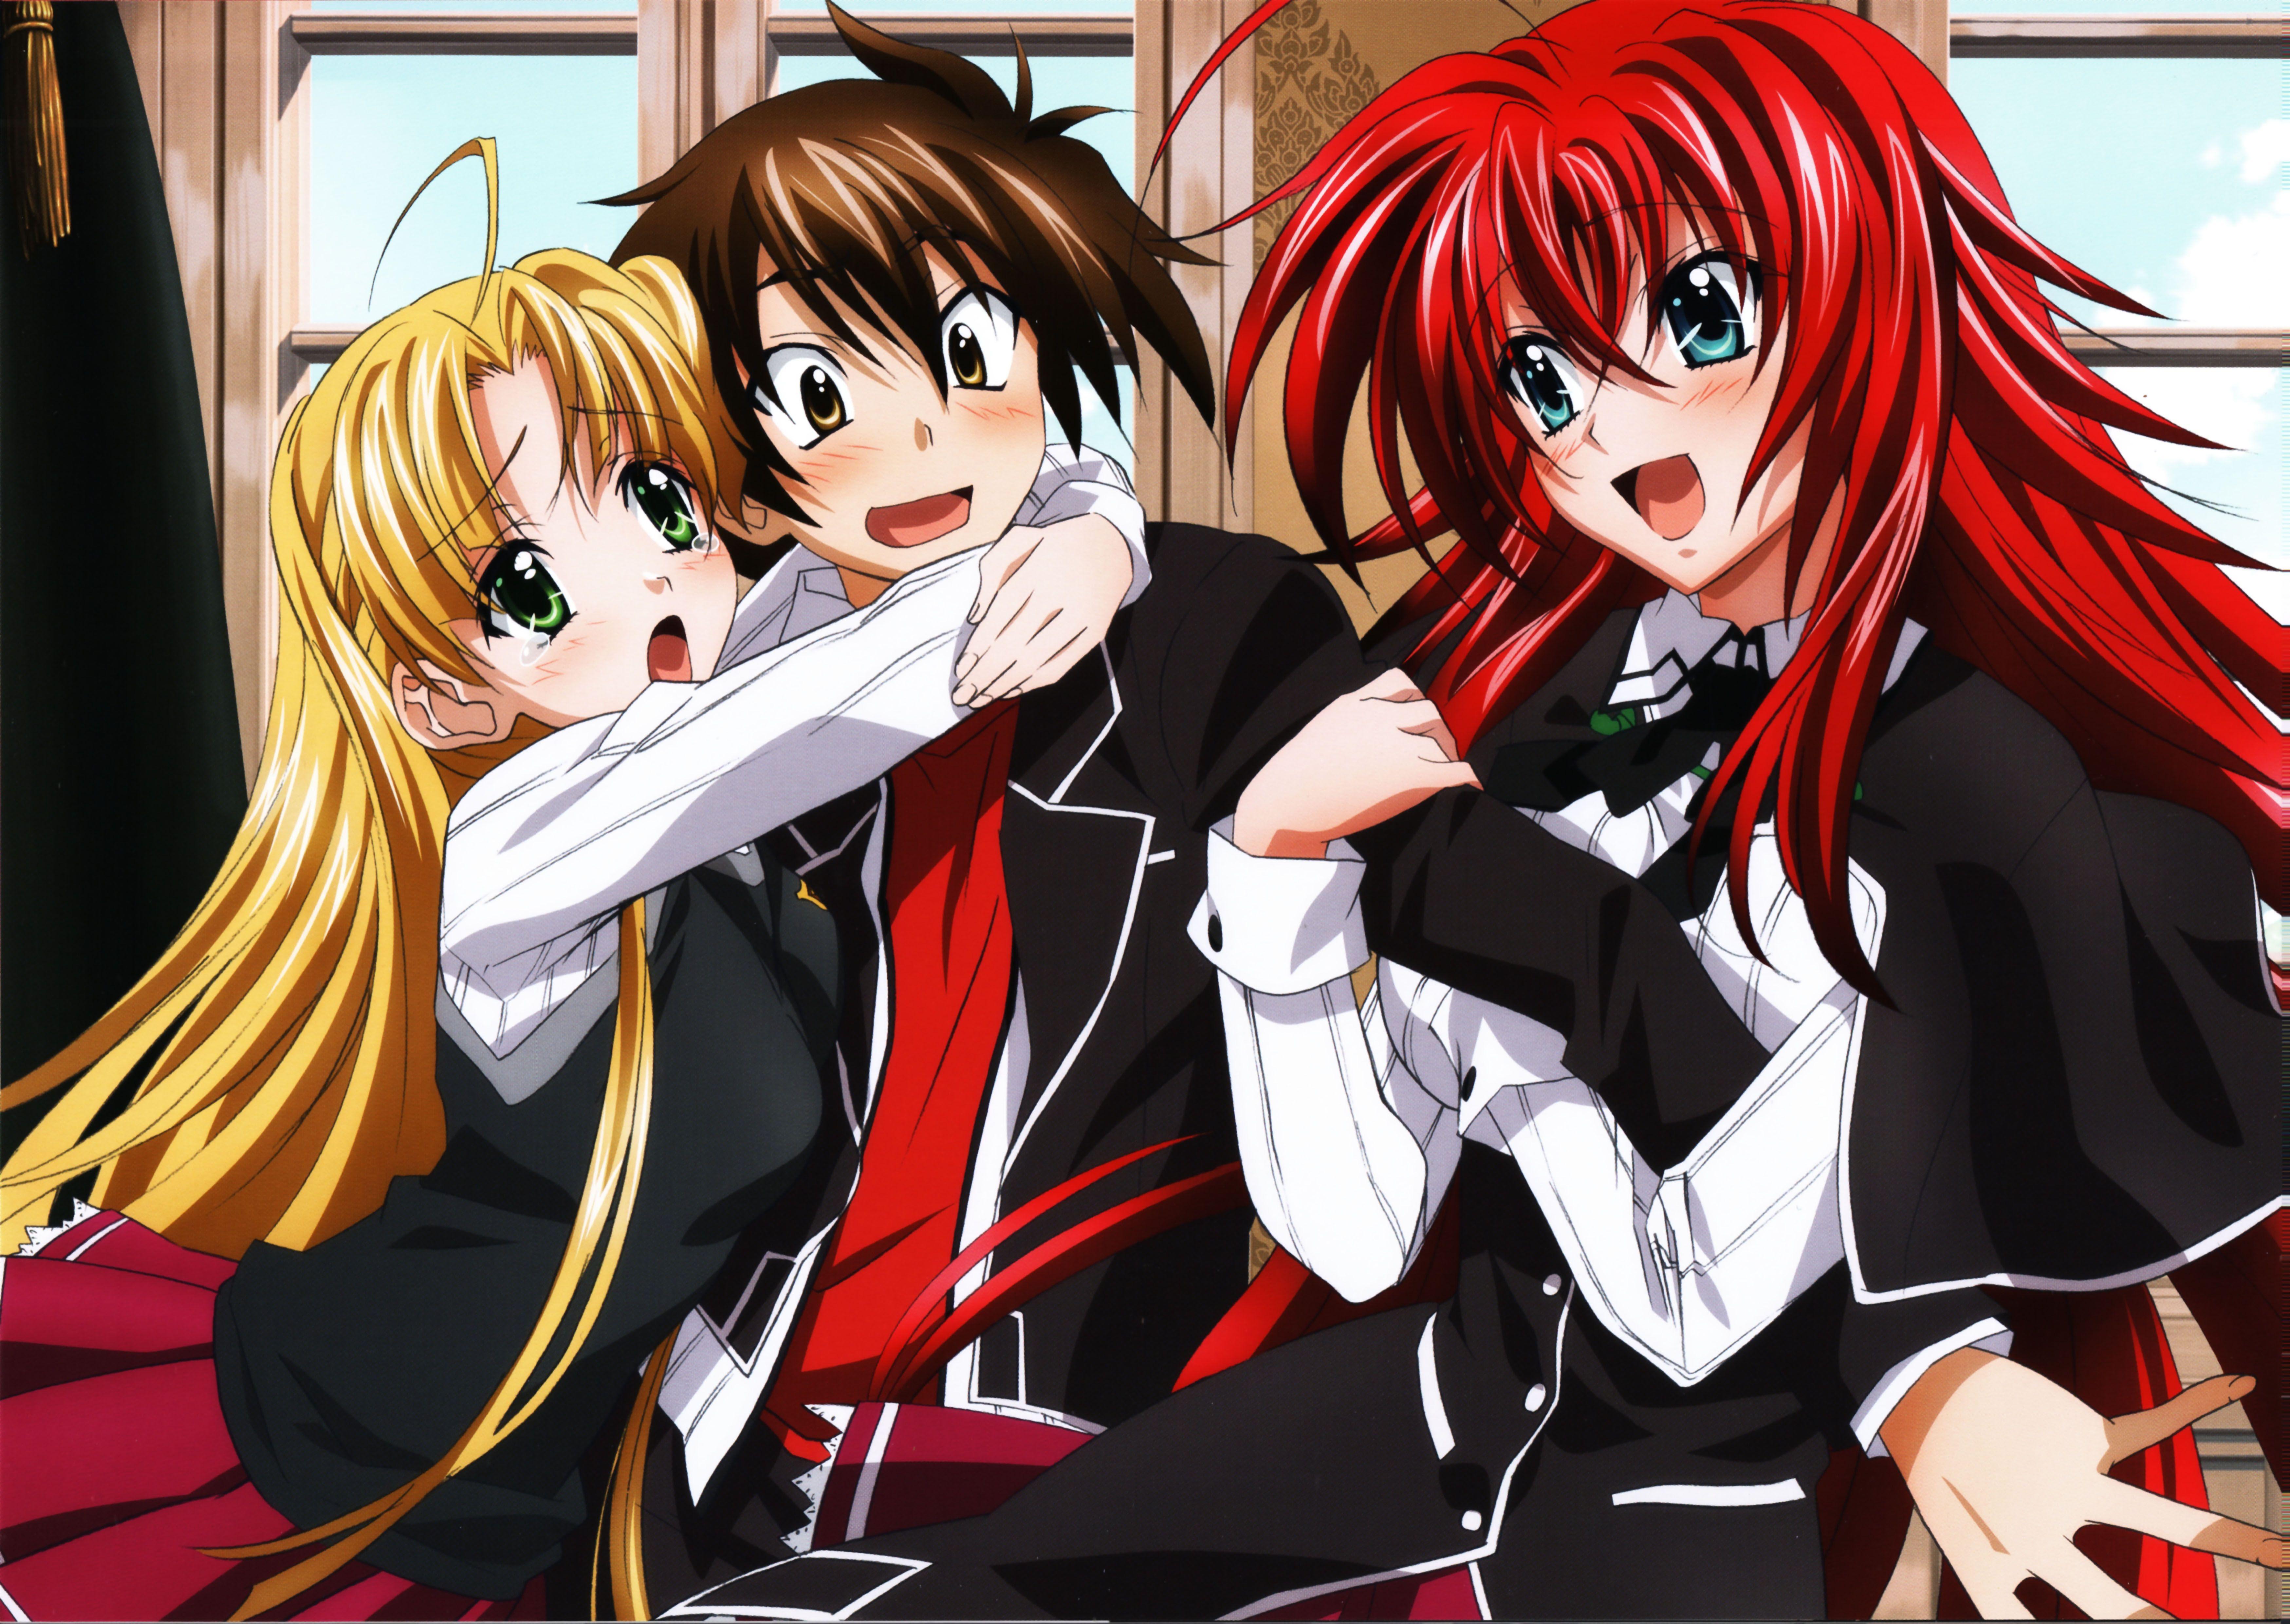 Hello! Im issei also known as "Harem King"